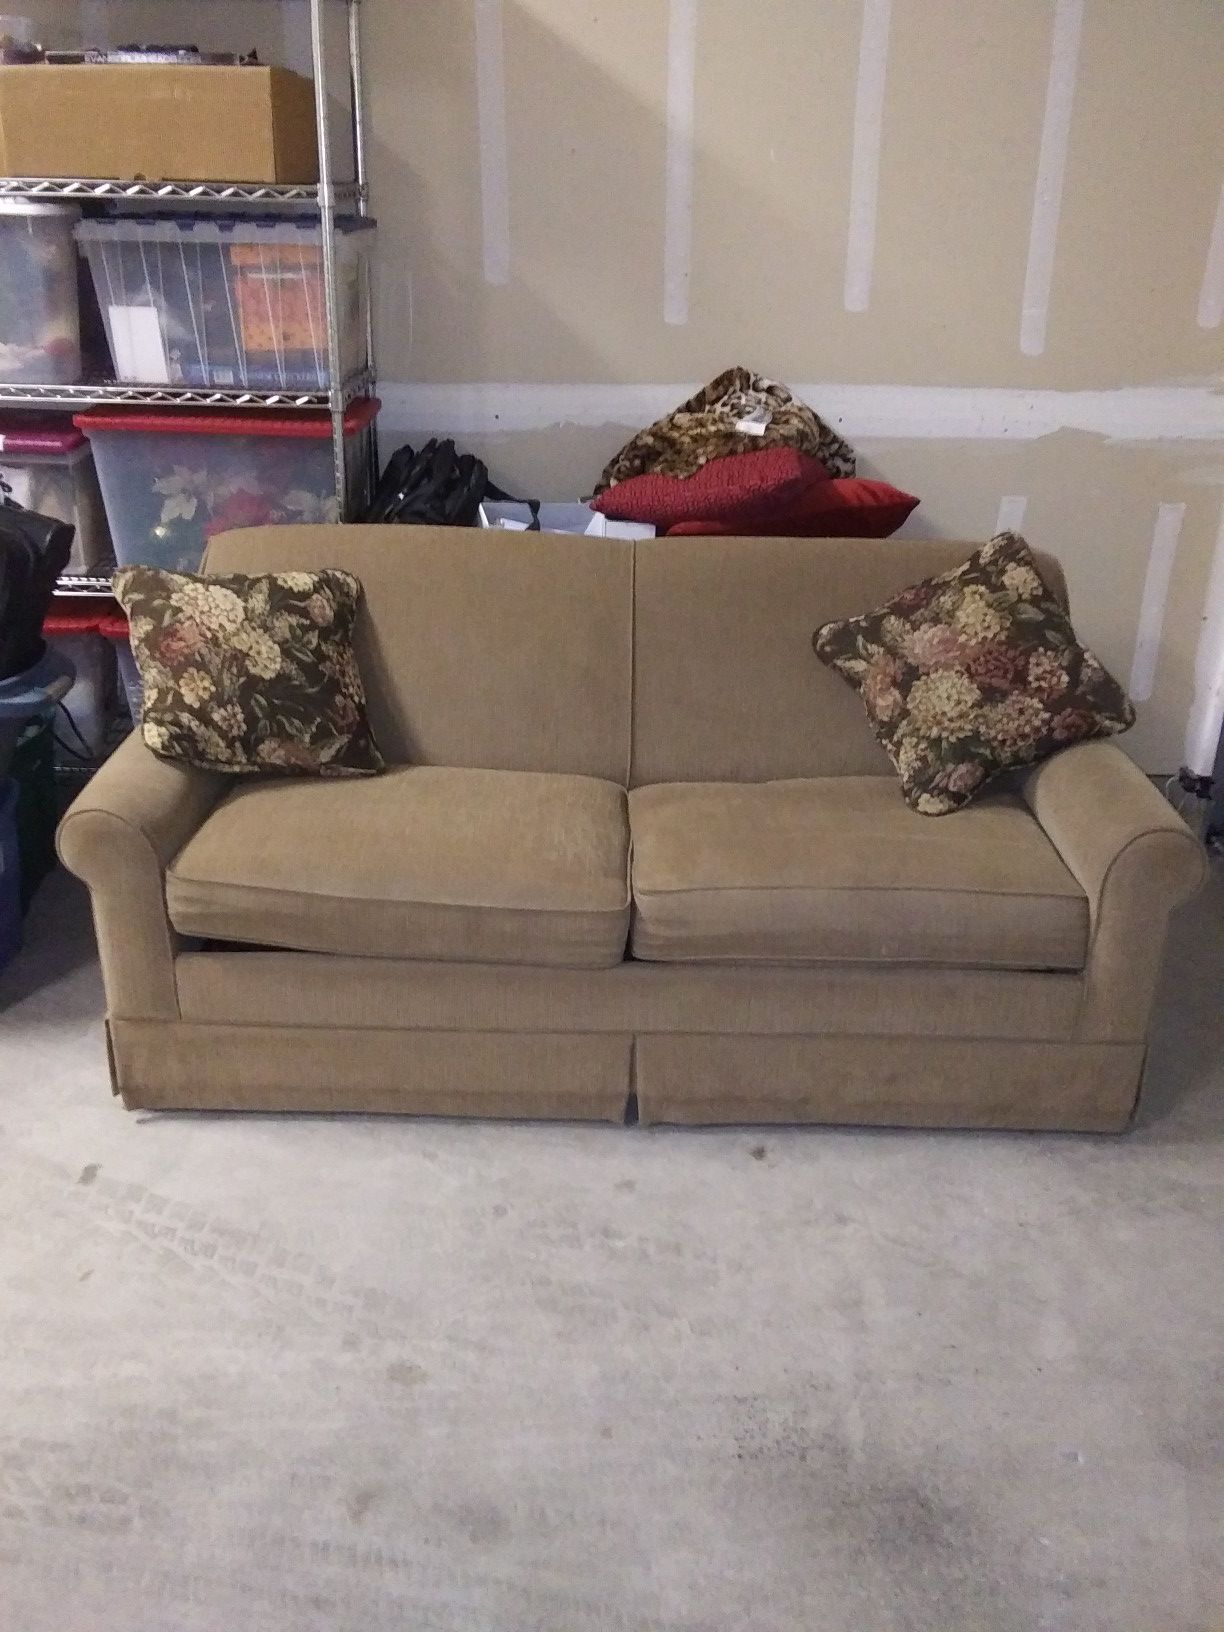 Queen size sofa bed brand new still has plastic on mattress